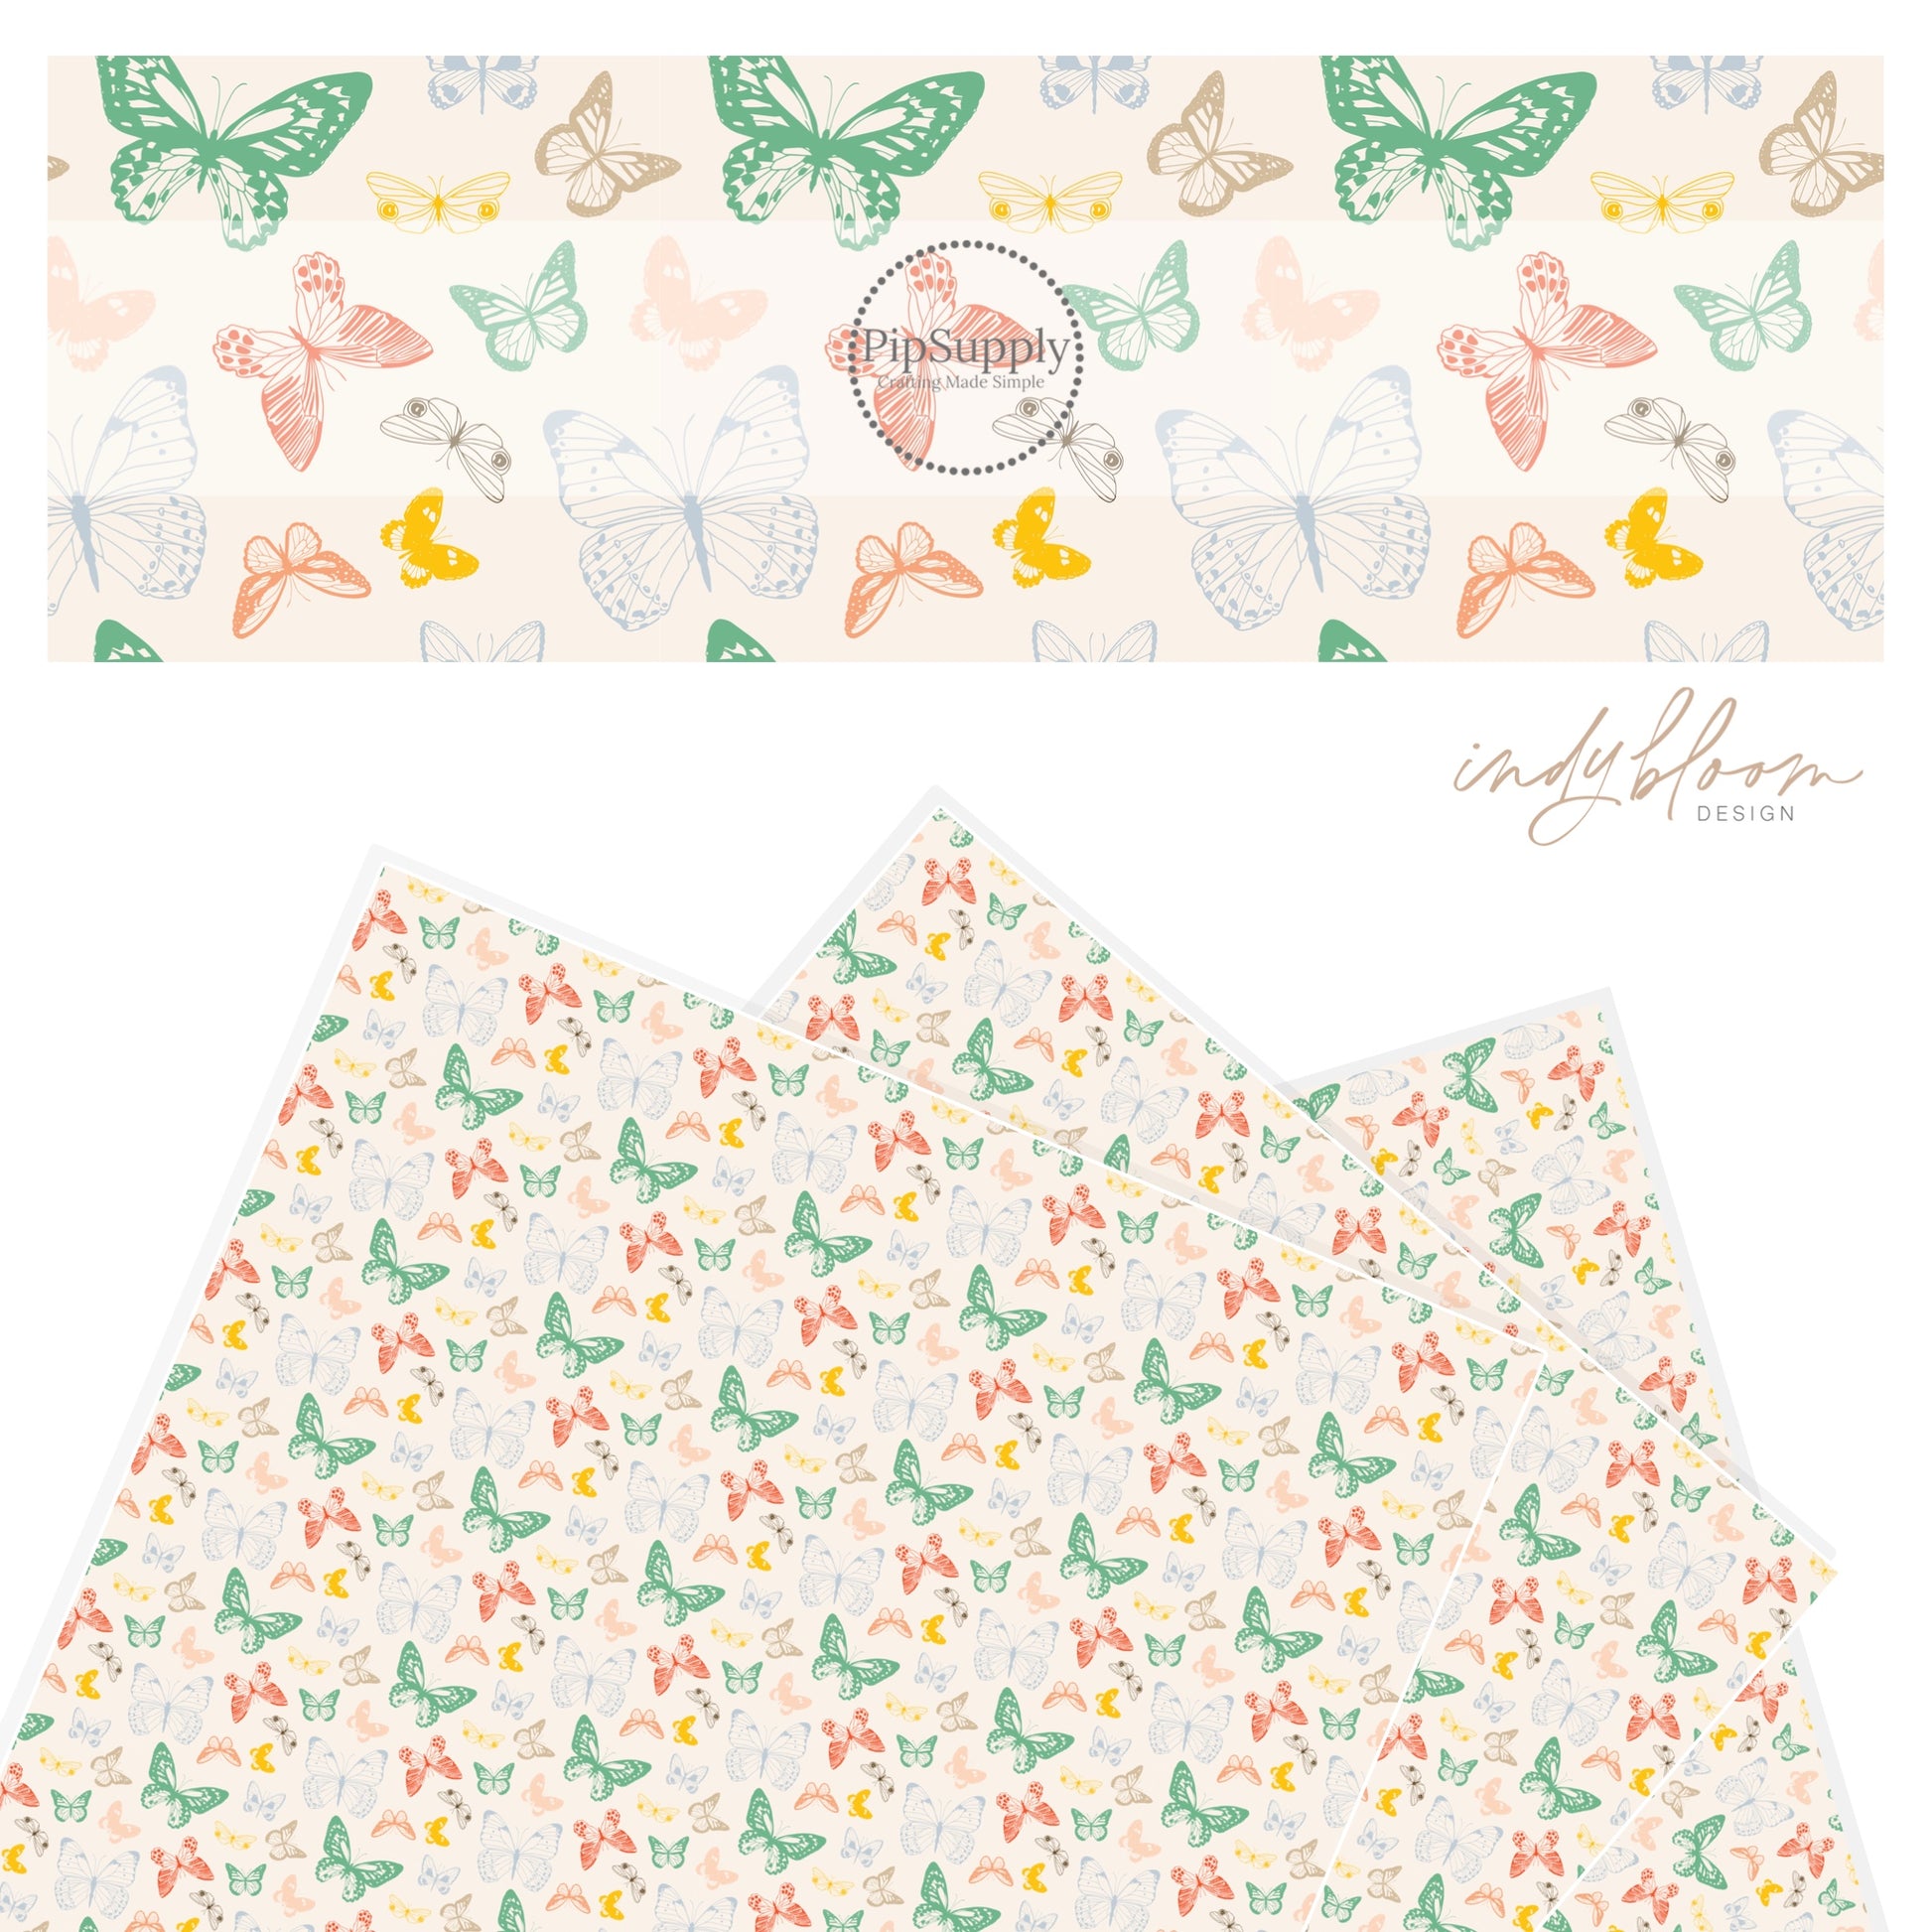 Green, blue, pink, and yellow butterflies on cream faux leather sheet.